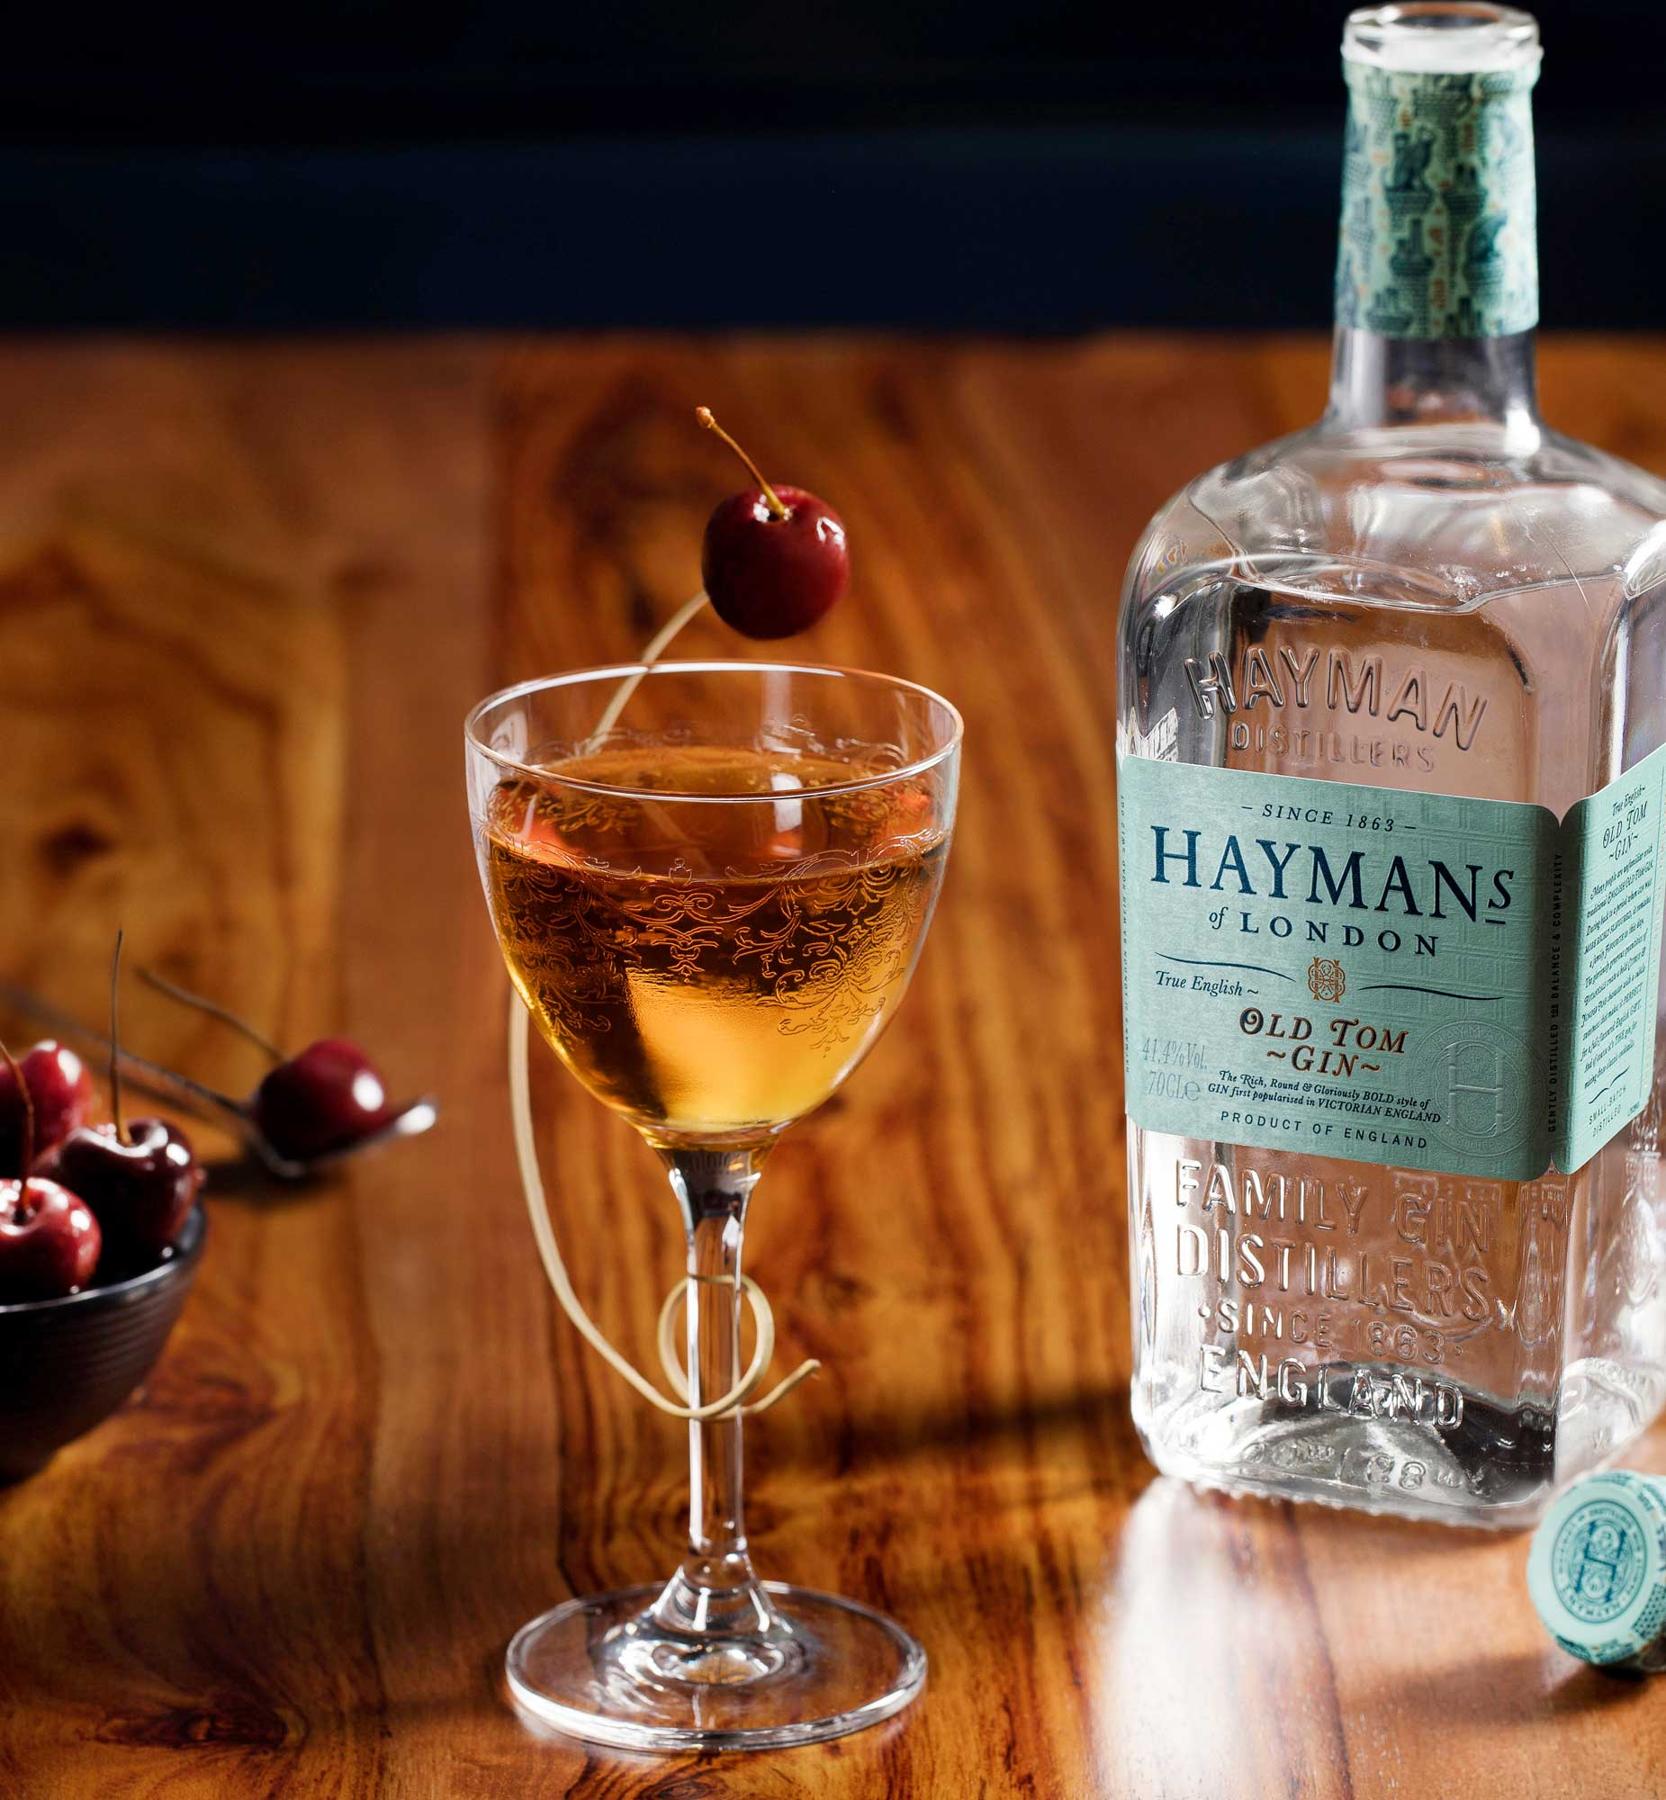 An example of the Martinez, the mixed drink (drink) featuring Hayman’s Old Tom Gin, Cocchi Vermouth di Torino ‘Storico’, maraschino liqueur, orange bitters, and orange twist; photo by Hayman’s of London